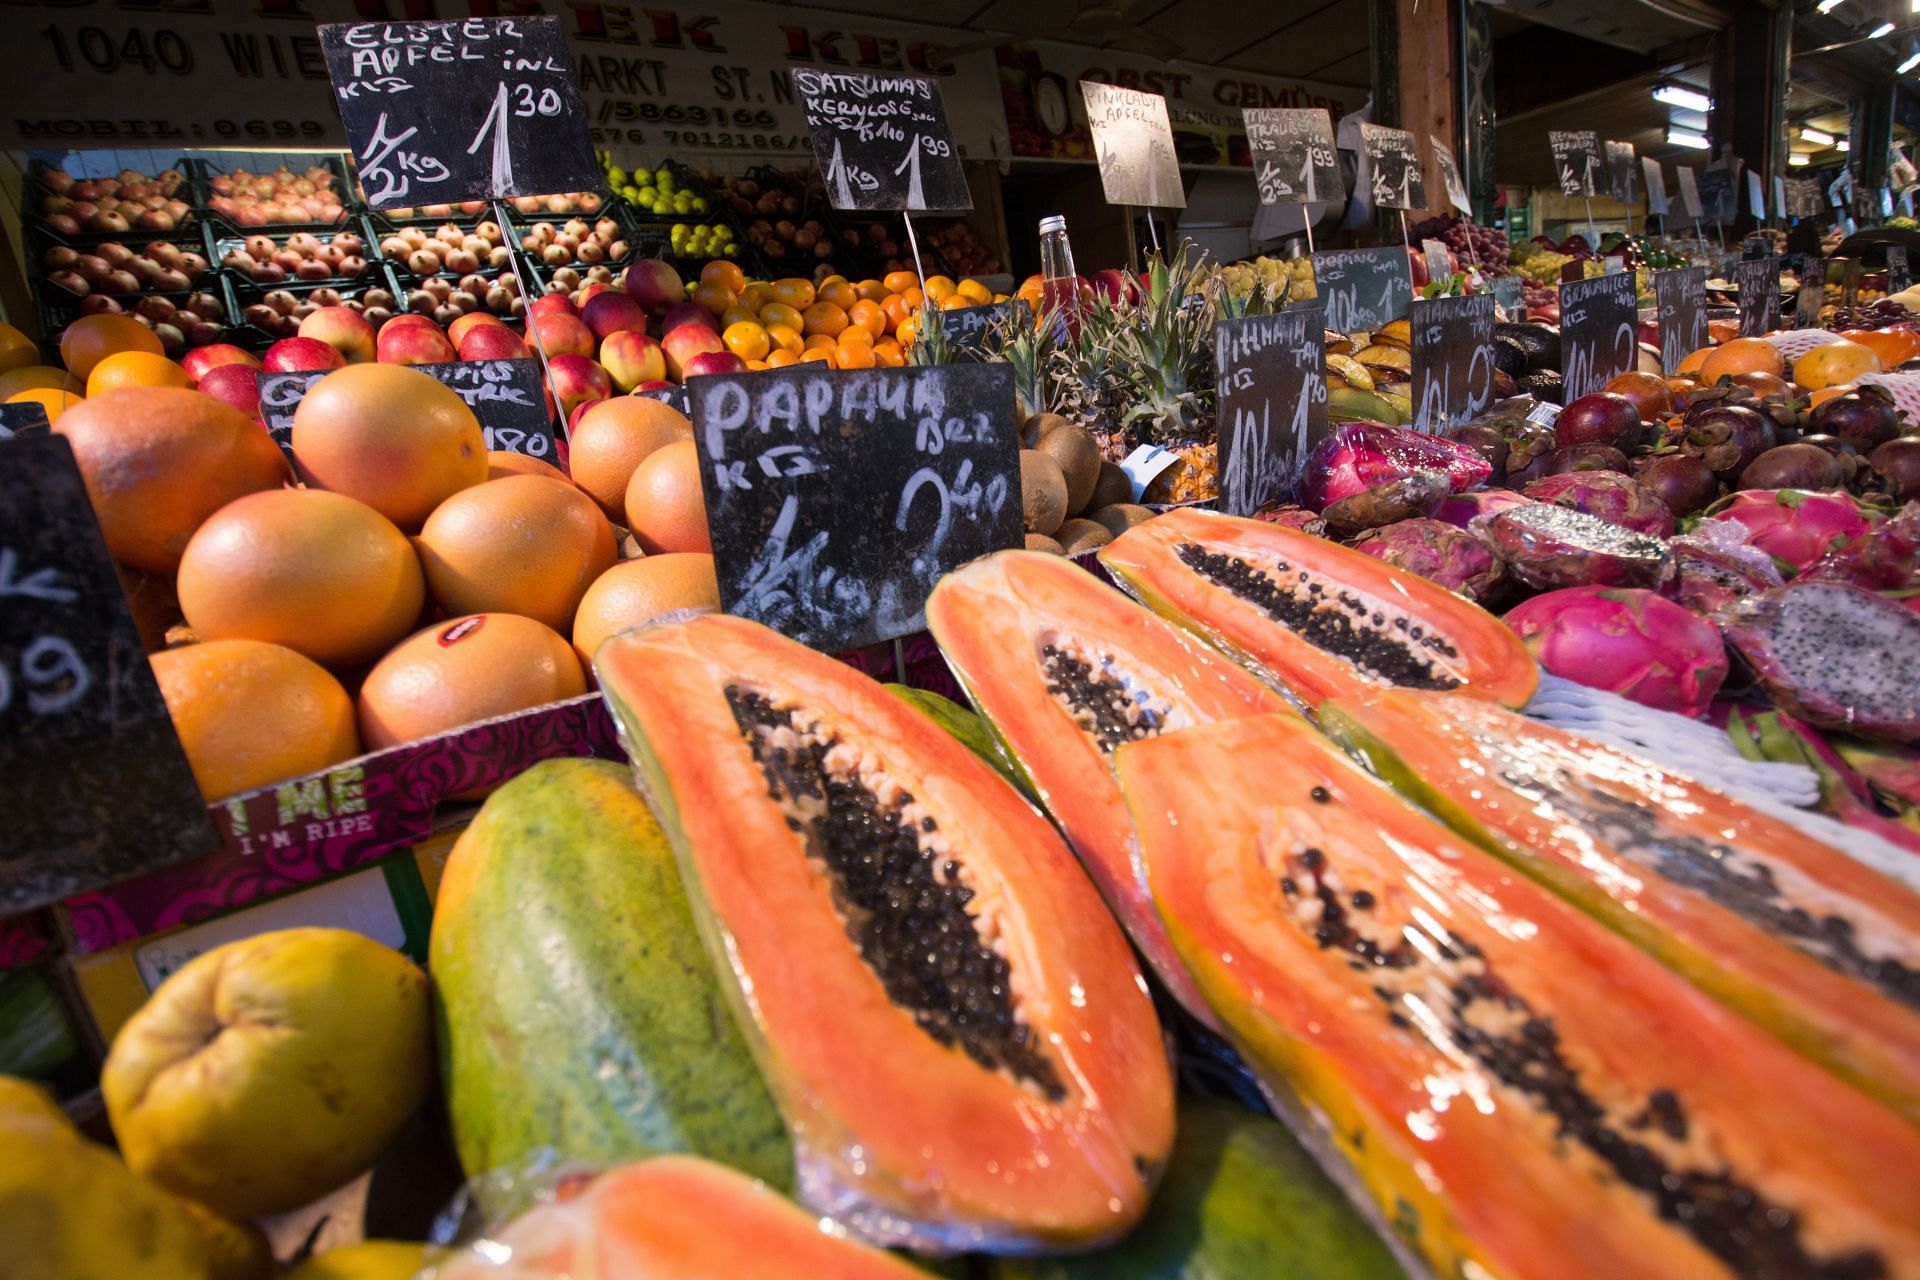 Papaya as one of the best fat burning fruits (image sourced via Pexels / Photo by Picmambacom)